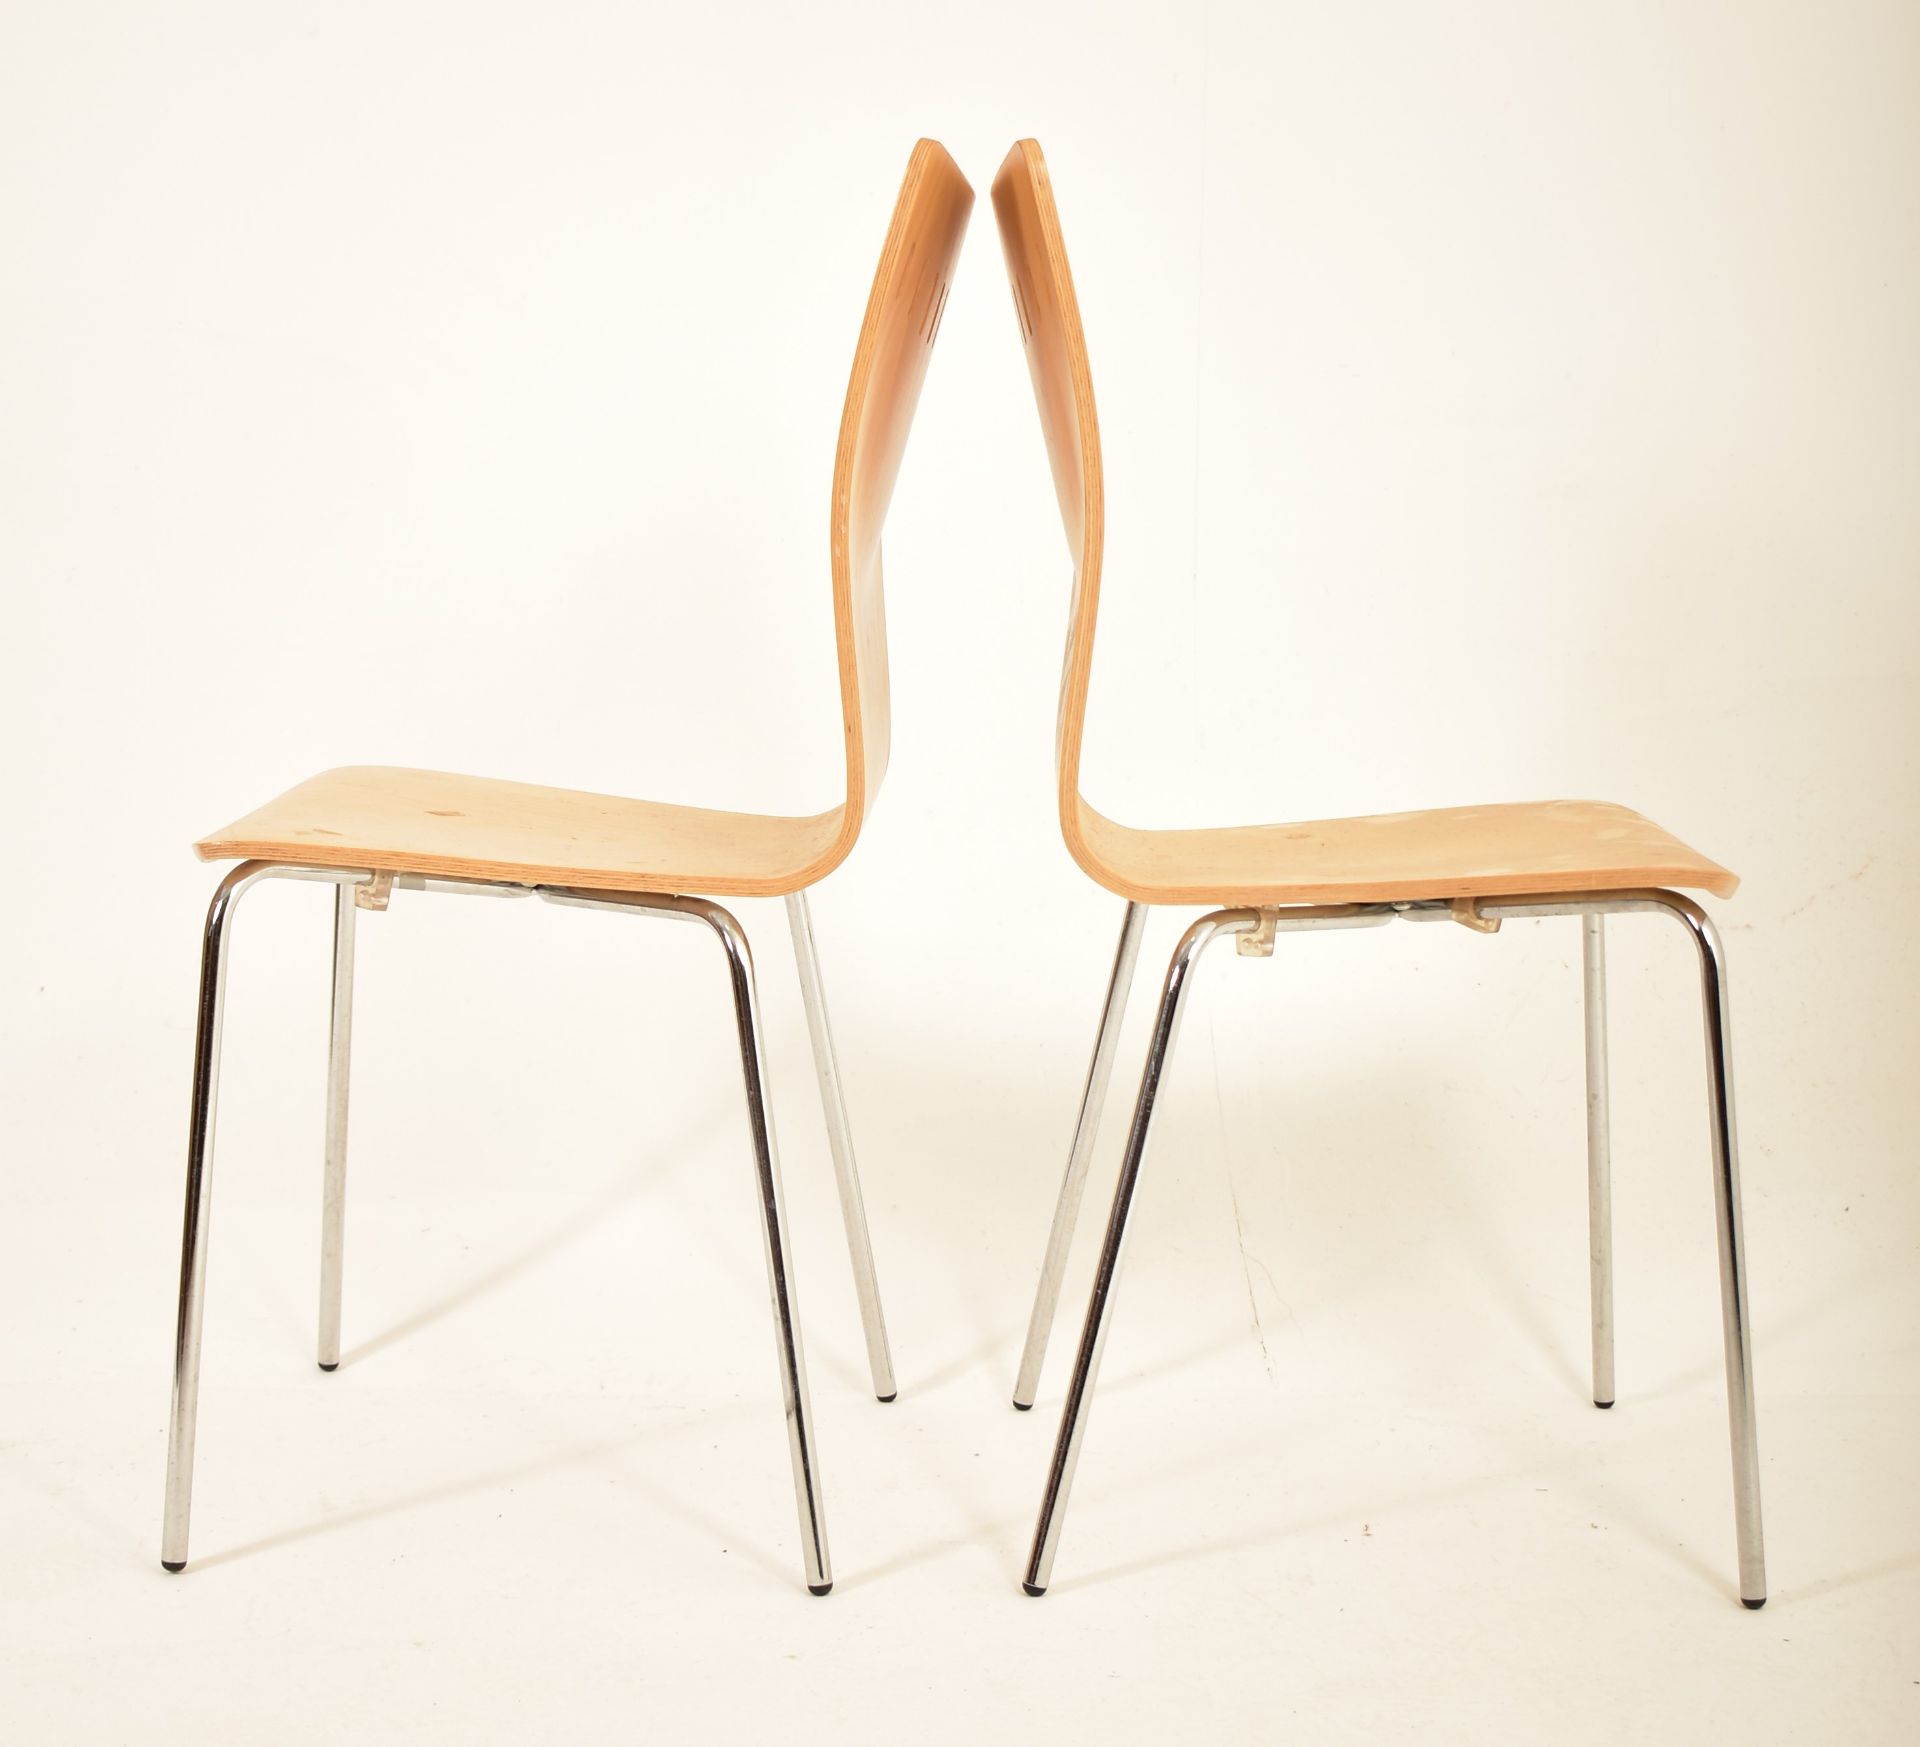 MATCHING SET OF EIGHT PLYWOOD STACKING DINING CHAIRS - Image 5 of 5